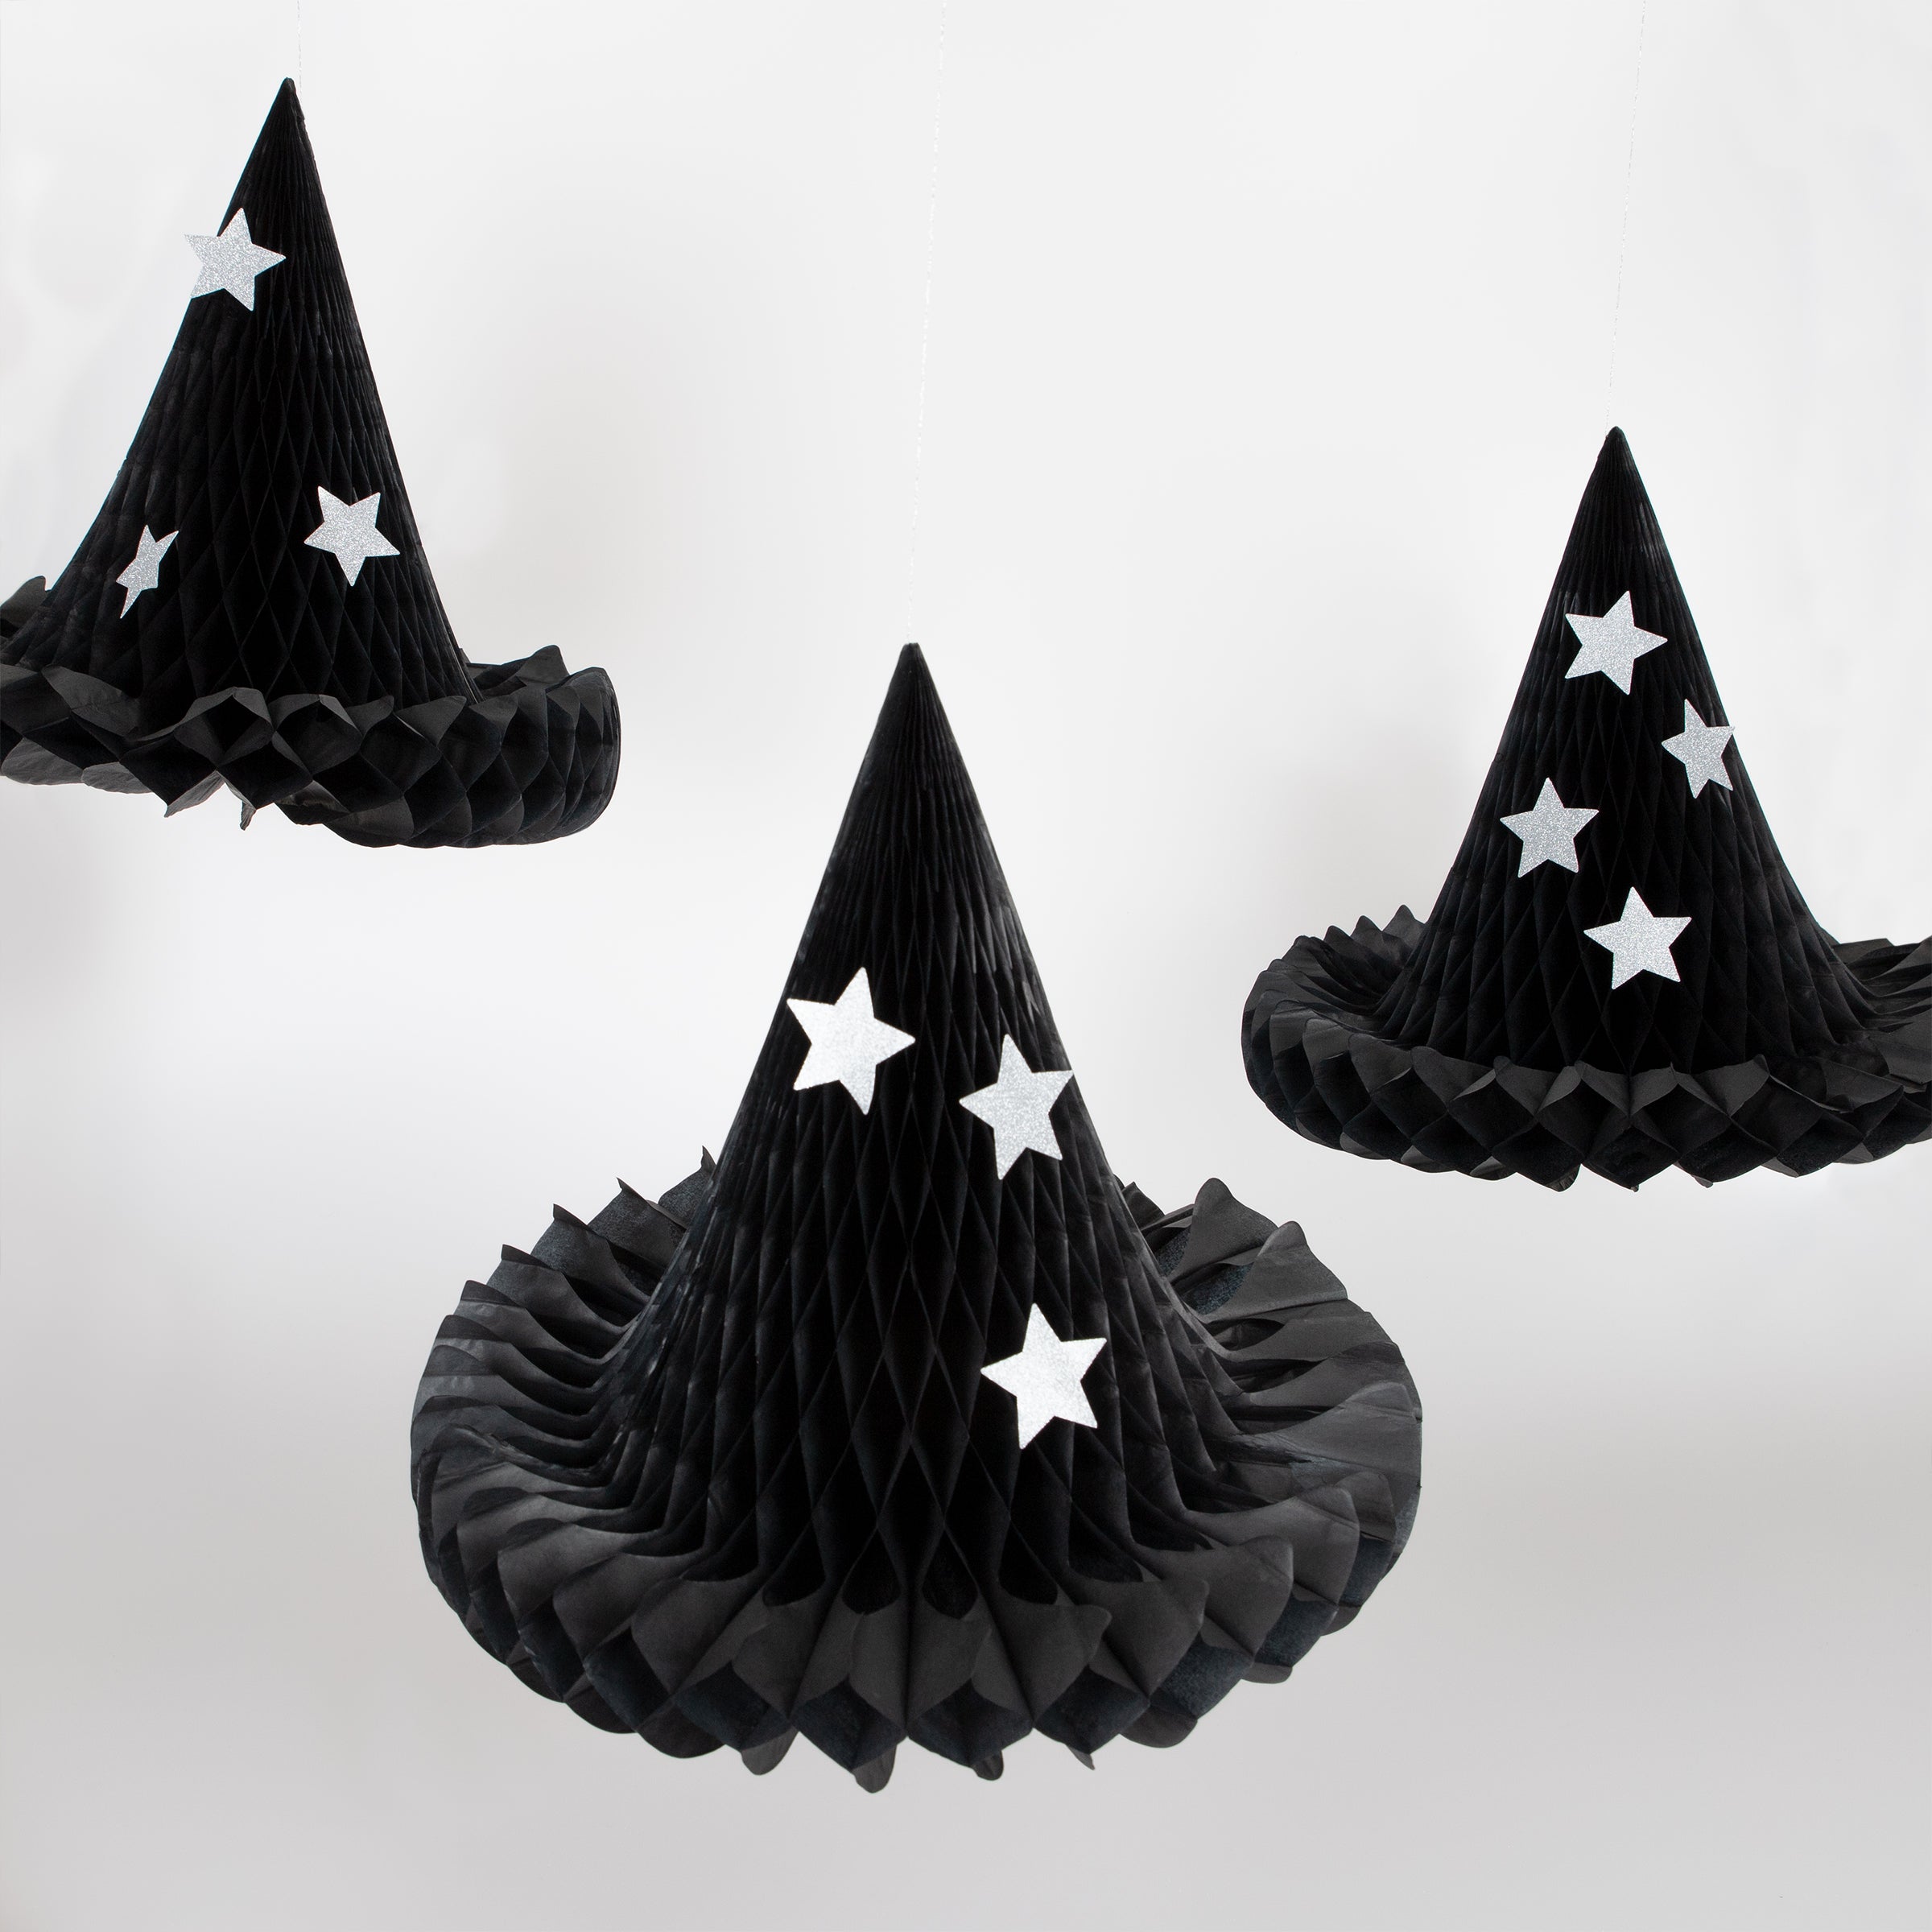 Our witch hats, with silver glitter stars, are the perfect hanging Halloween decorations.